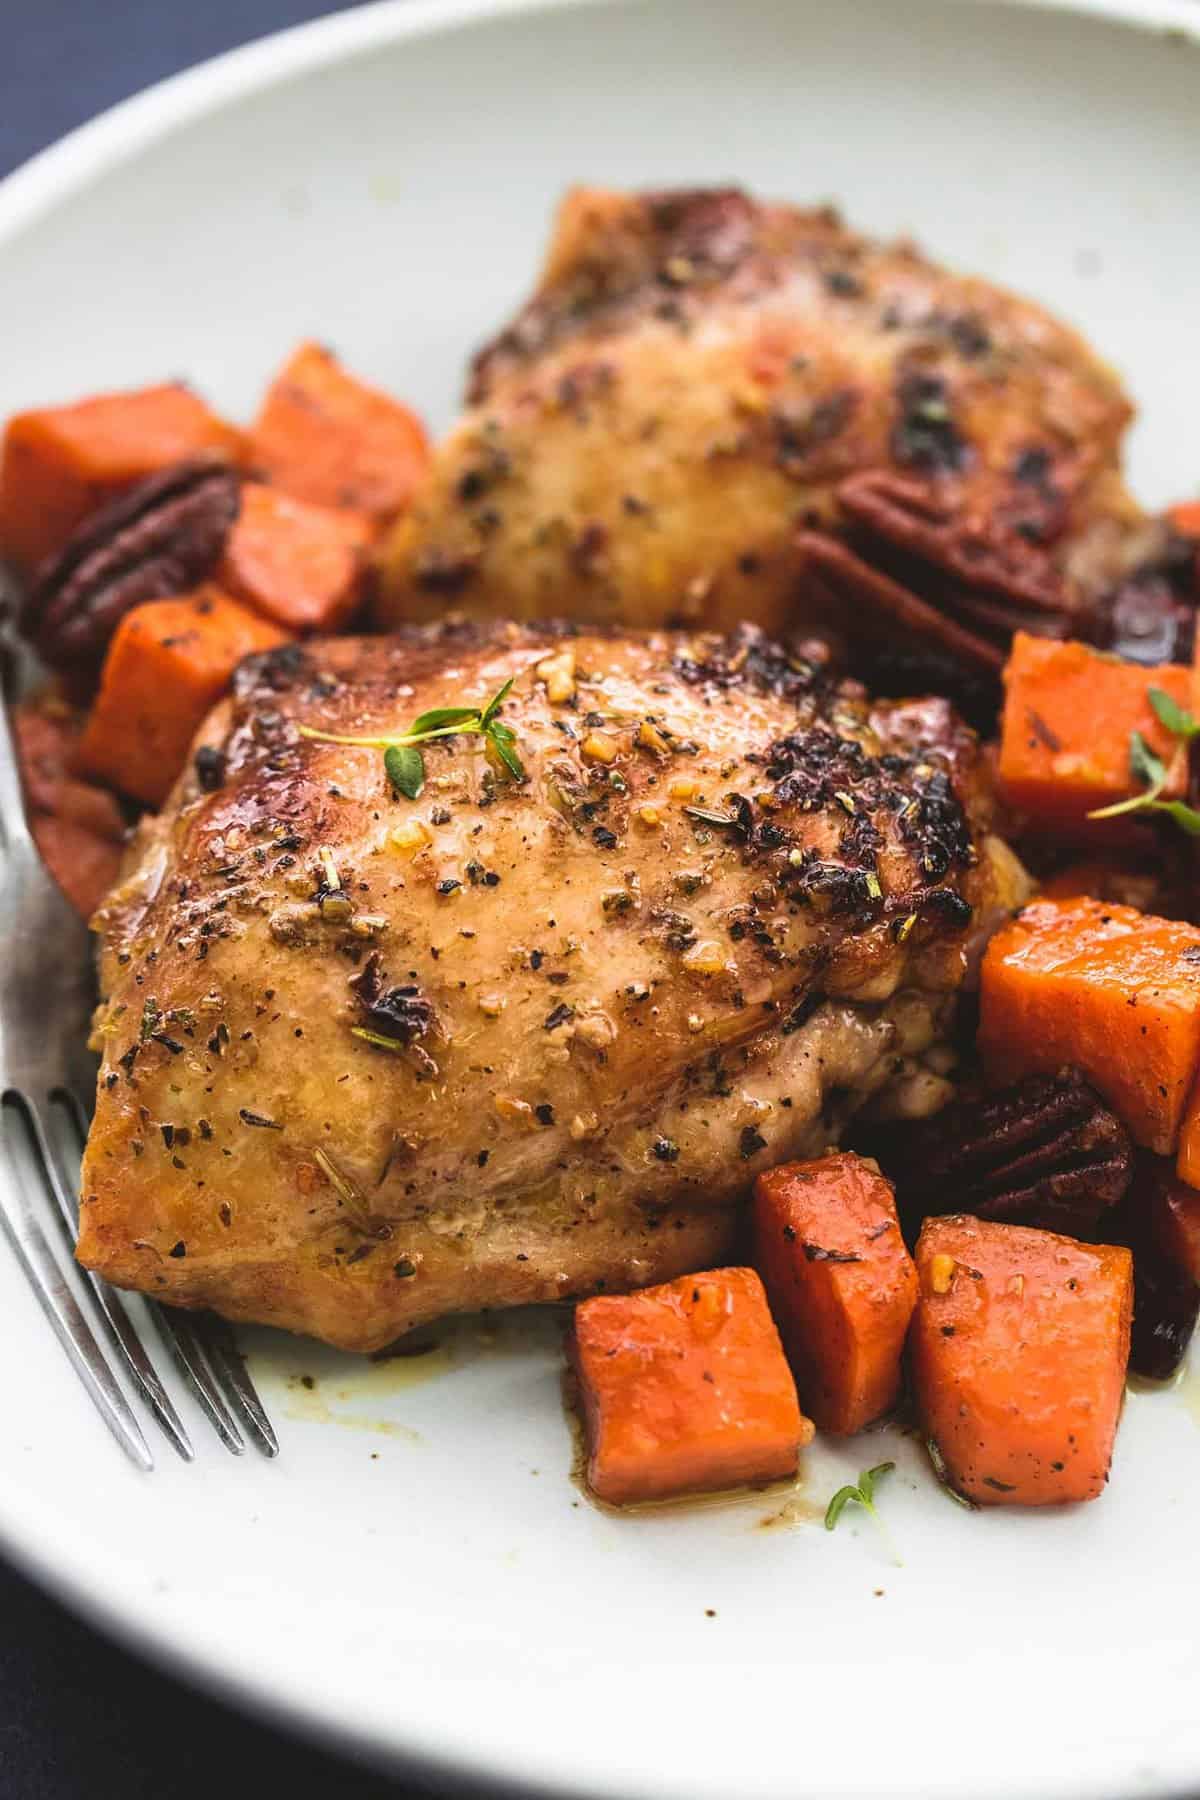 This easy and simple honey roasted chicken and sweet potatoes skillet is everything you want in a hearty, comforting Fall meal. This tasty one pan meal will be ready in about 30 minutes and you will love the flavors!  | lecremedelacrumb.com